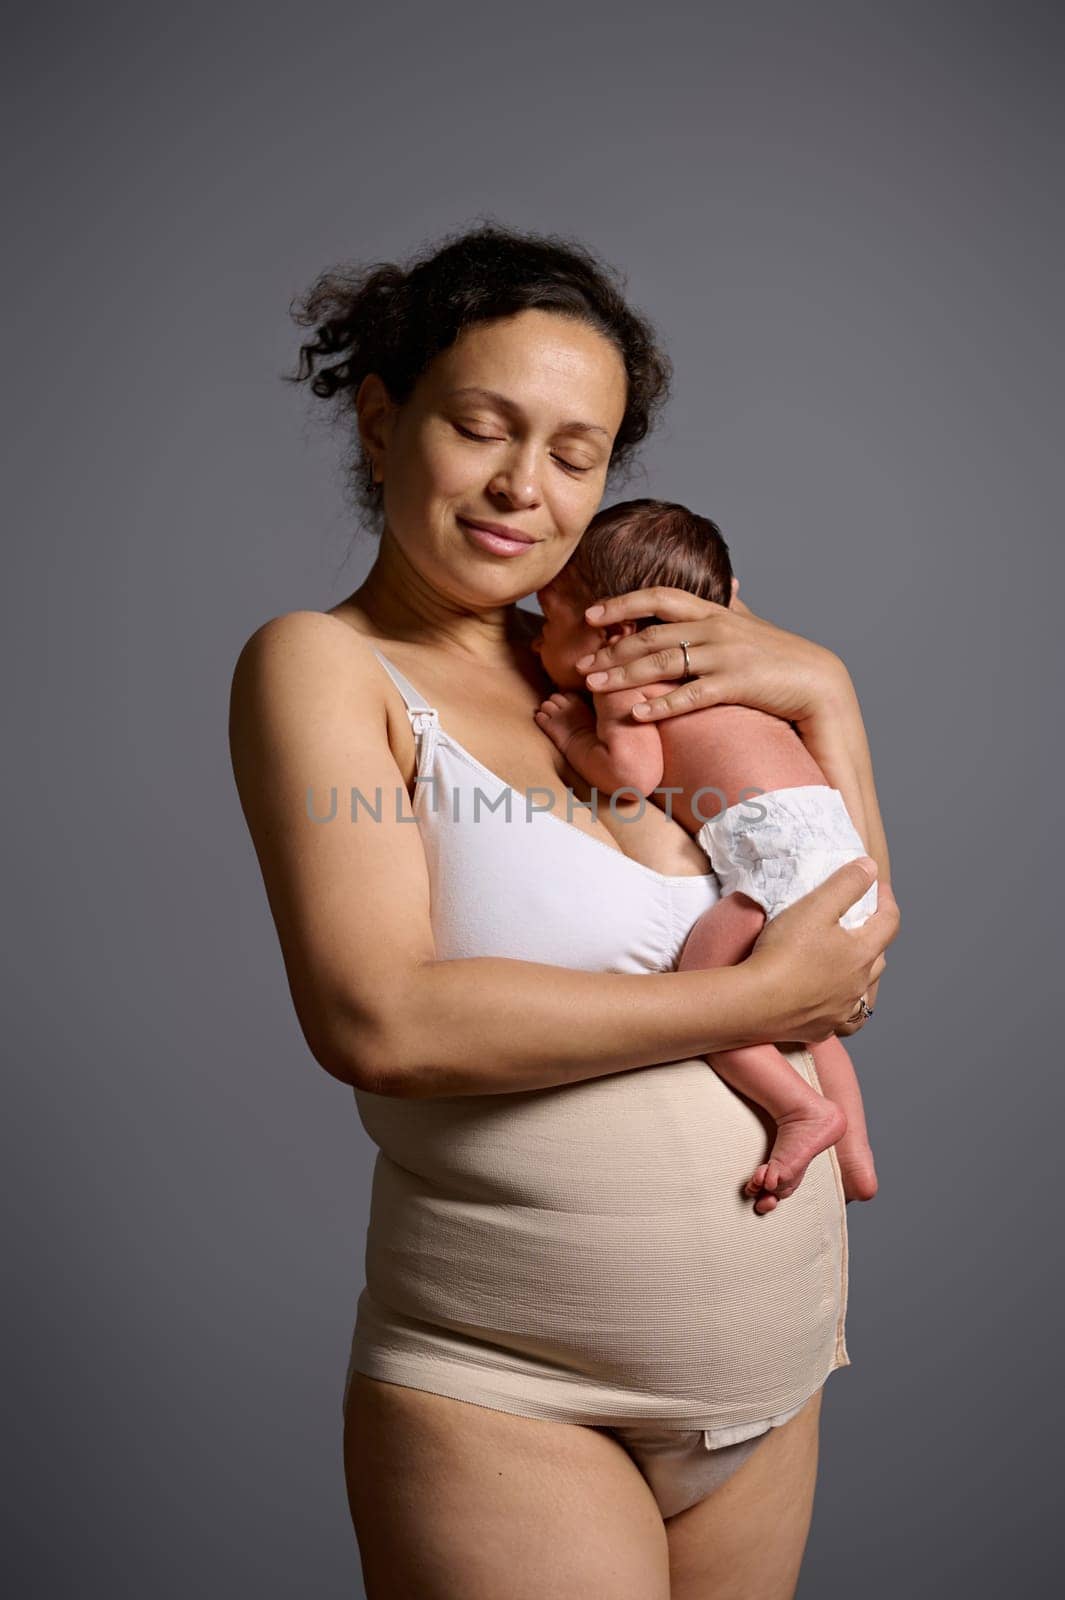 Multiethnic young woman, a loving caring mother, dressed in underwear and elastic bandage after c-section cesarean, carrying and hugging her newborn baby, isolated on gray studio background. Ad space